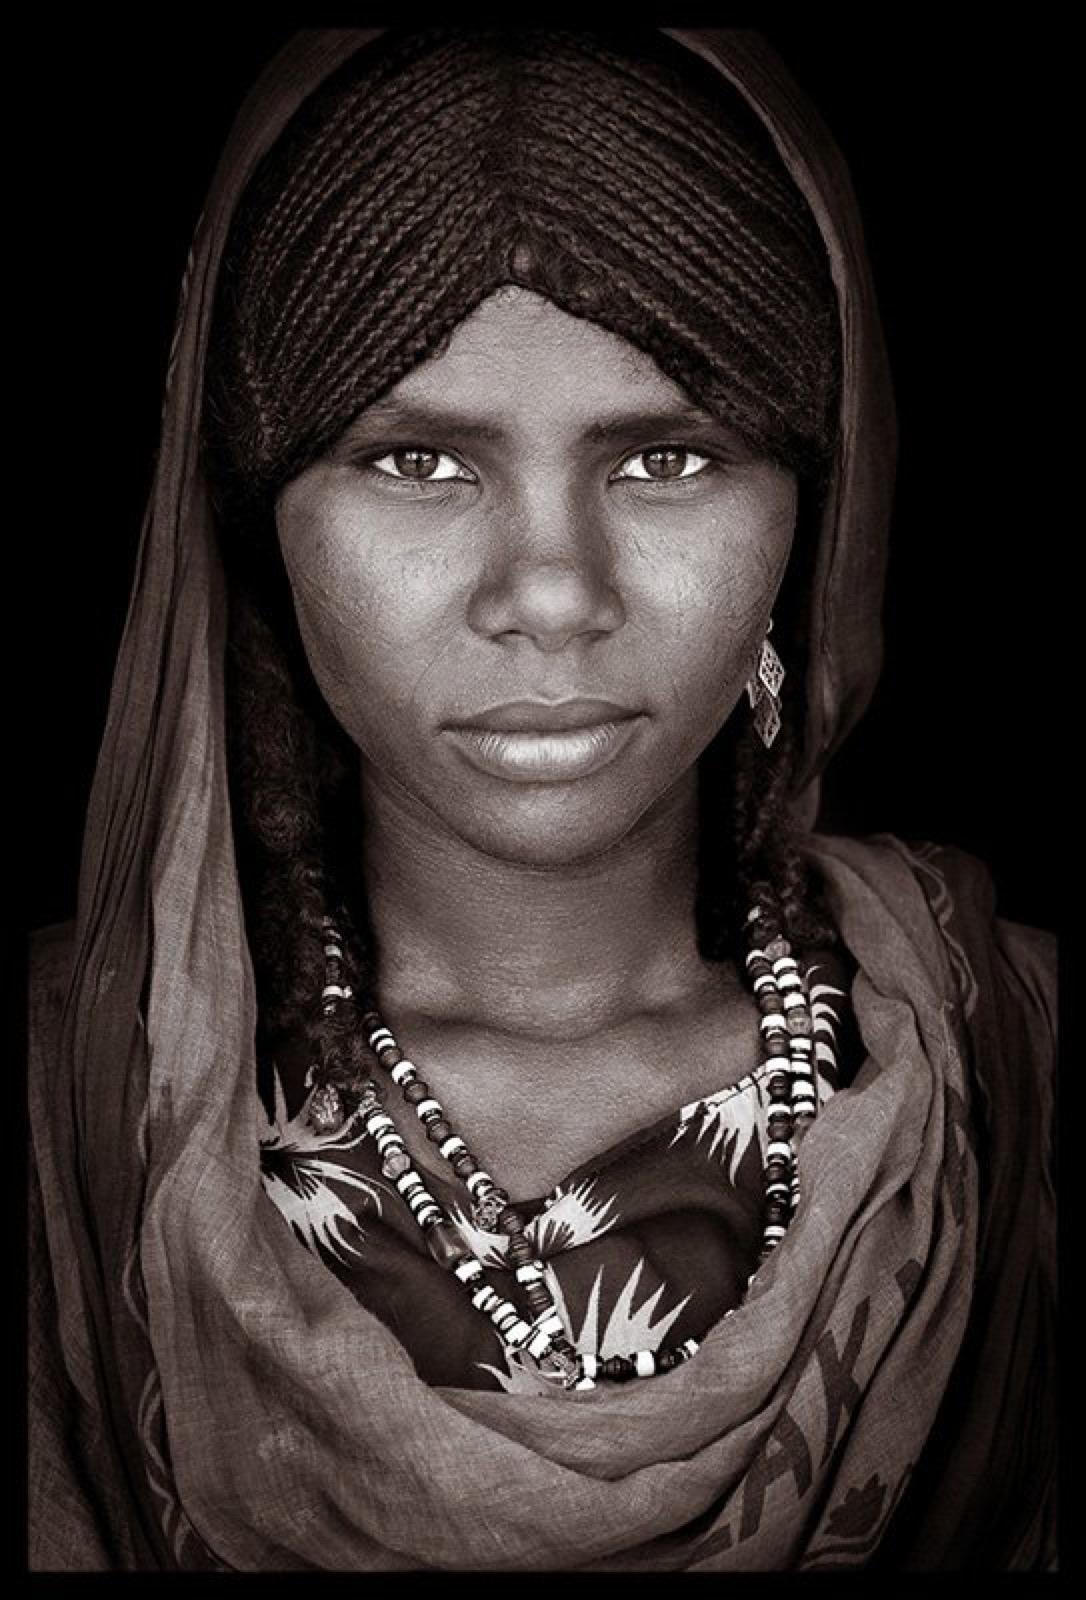 A young woman of the Afar culture
John Kenny’s work is all shot on location in some of the remotest corners of Africa. His images are all taken with natural light and in their day to day attire.

The C-type prints are mounted with an acrylic face